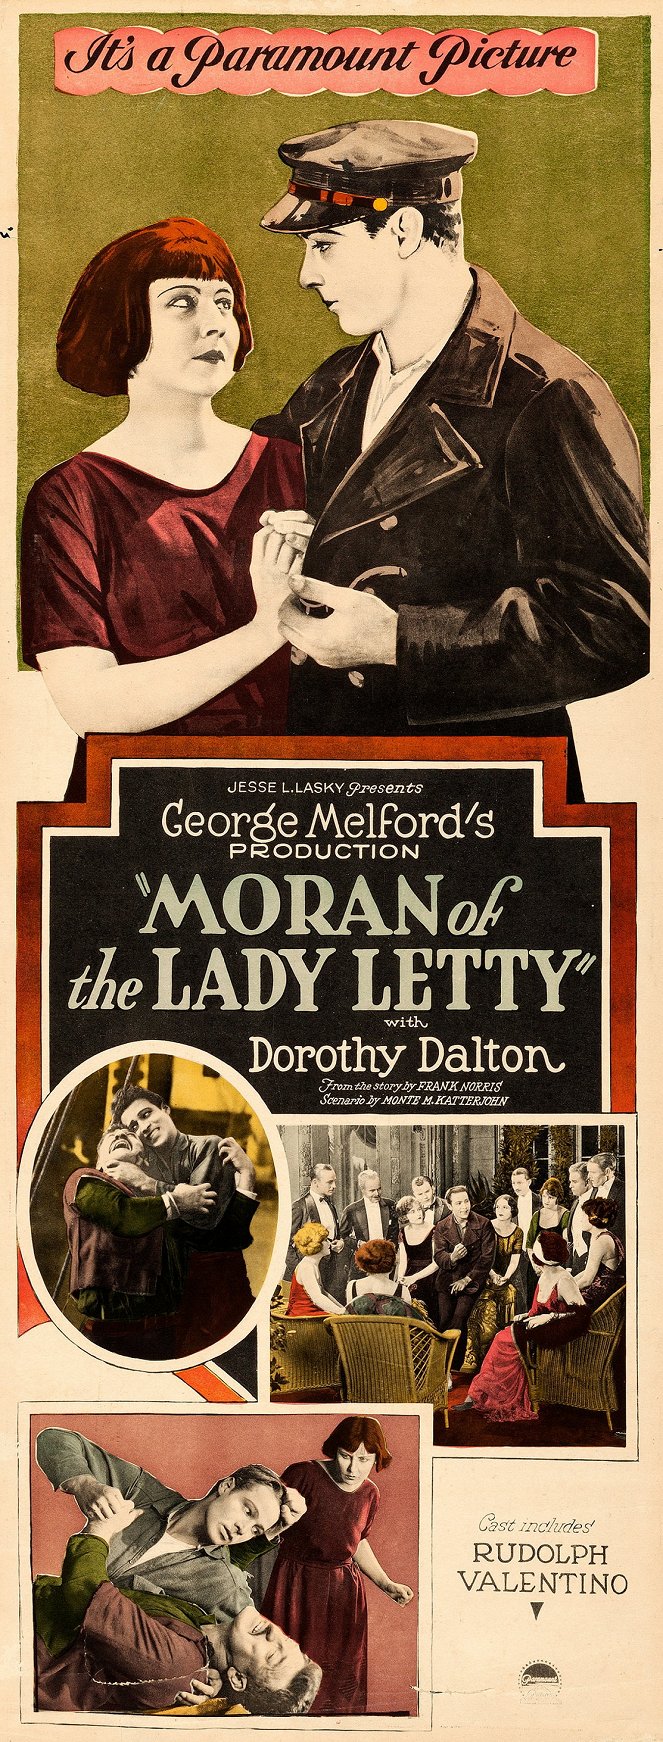 Moran of the Lady Letty - Posters